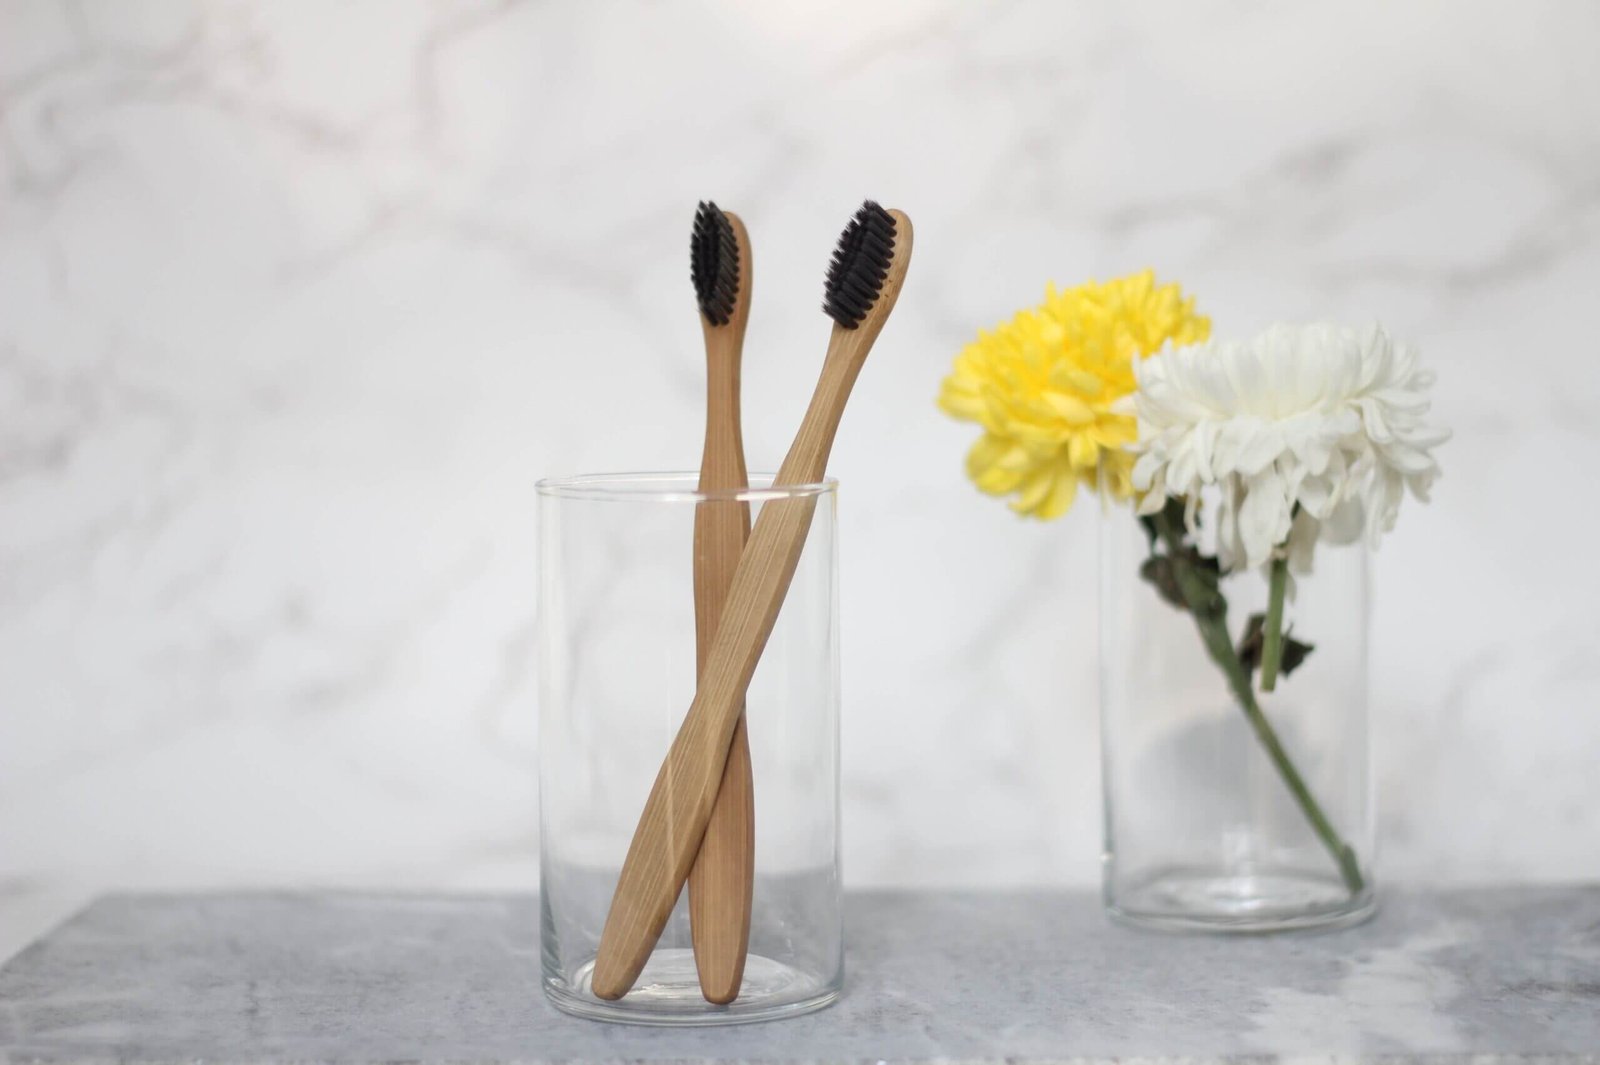 Brand Zero: Bamburoosh: Two Bamboo toothbrush with charcoal bristles in a glass cup